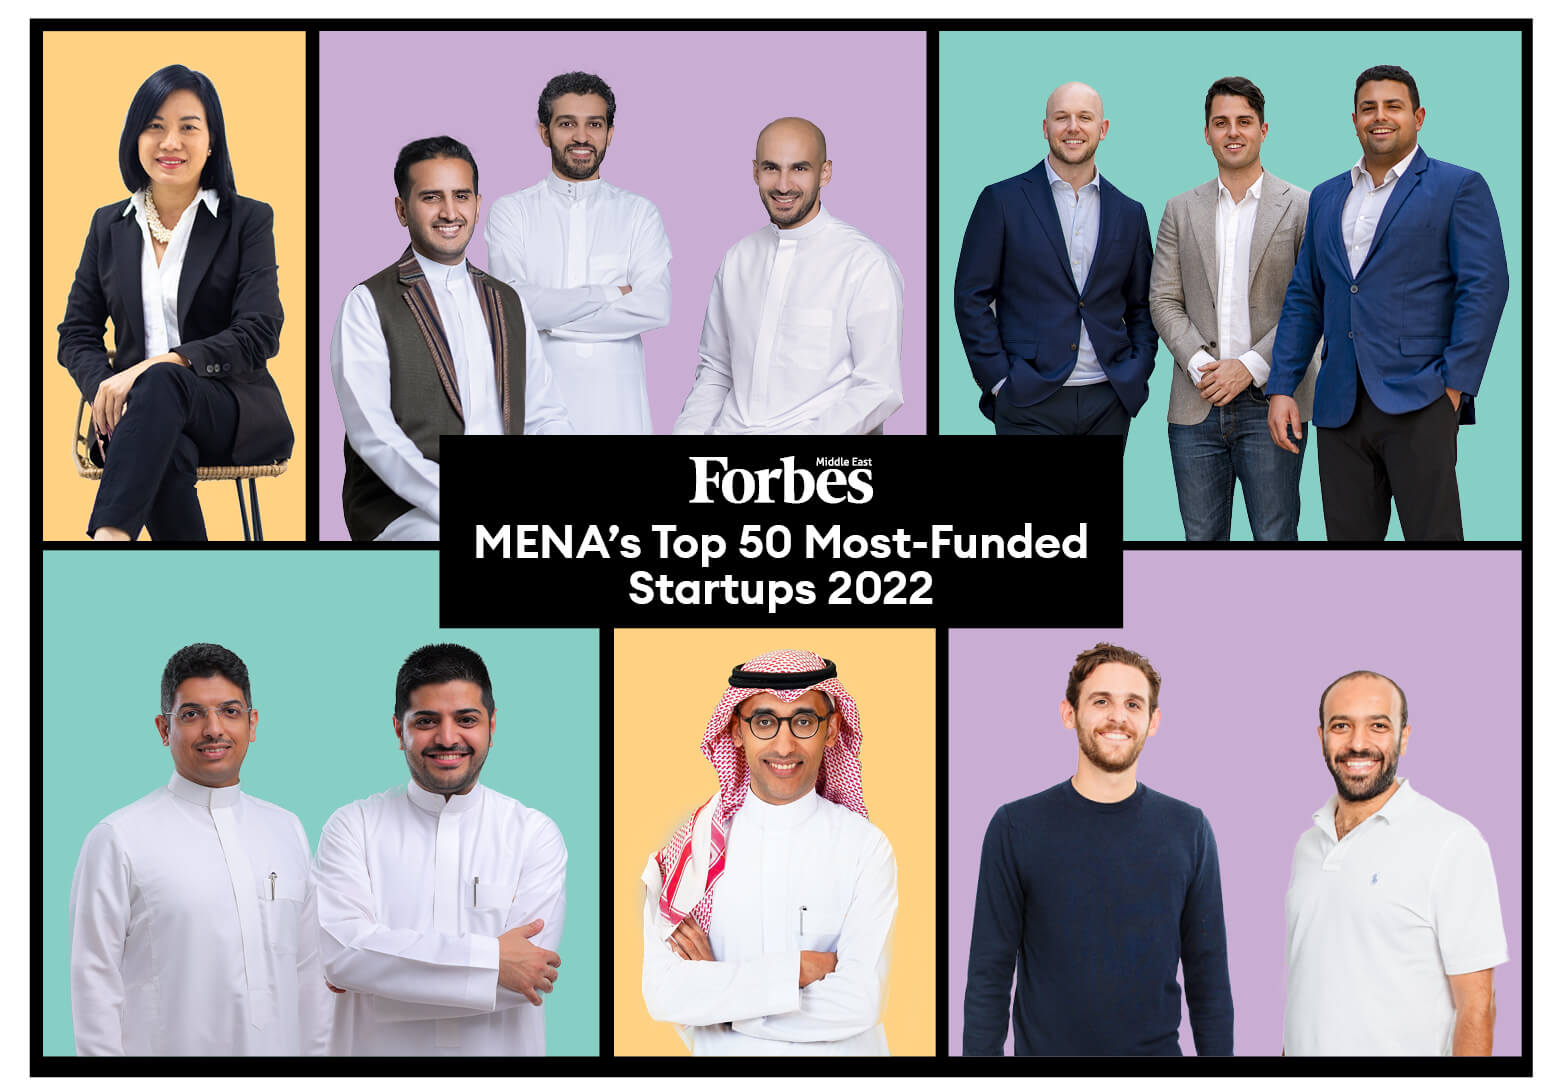 MENA's Top 50 Most Funded-Startups